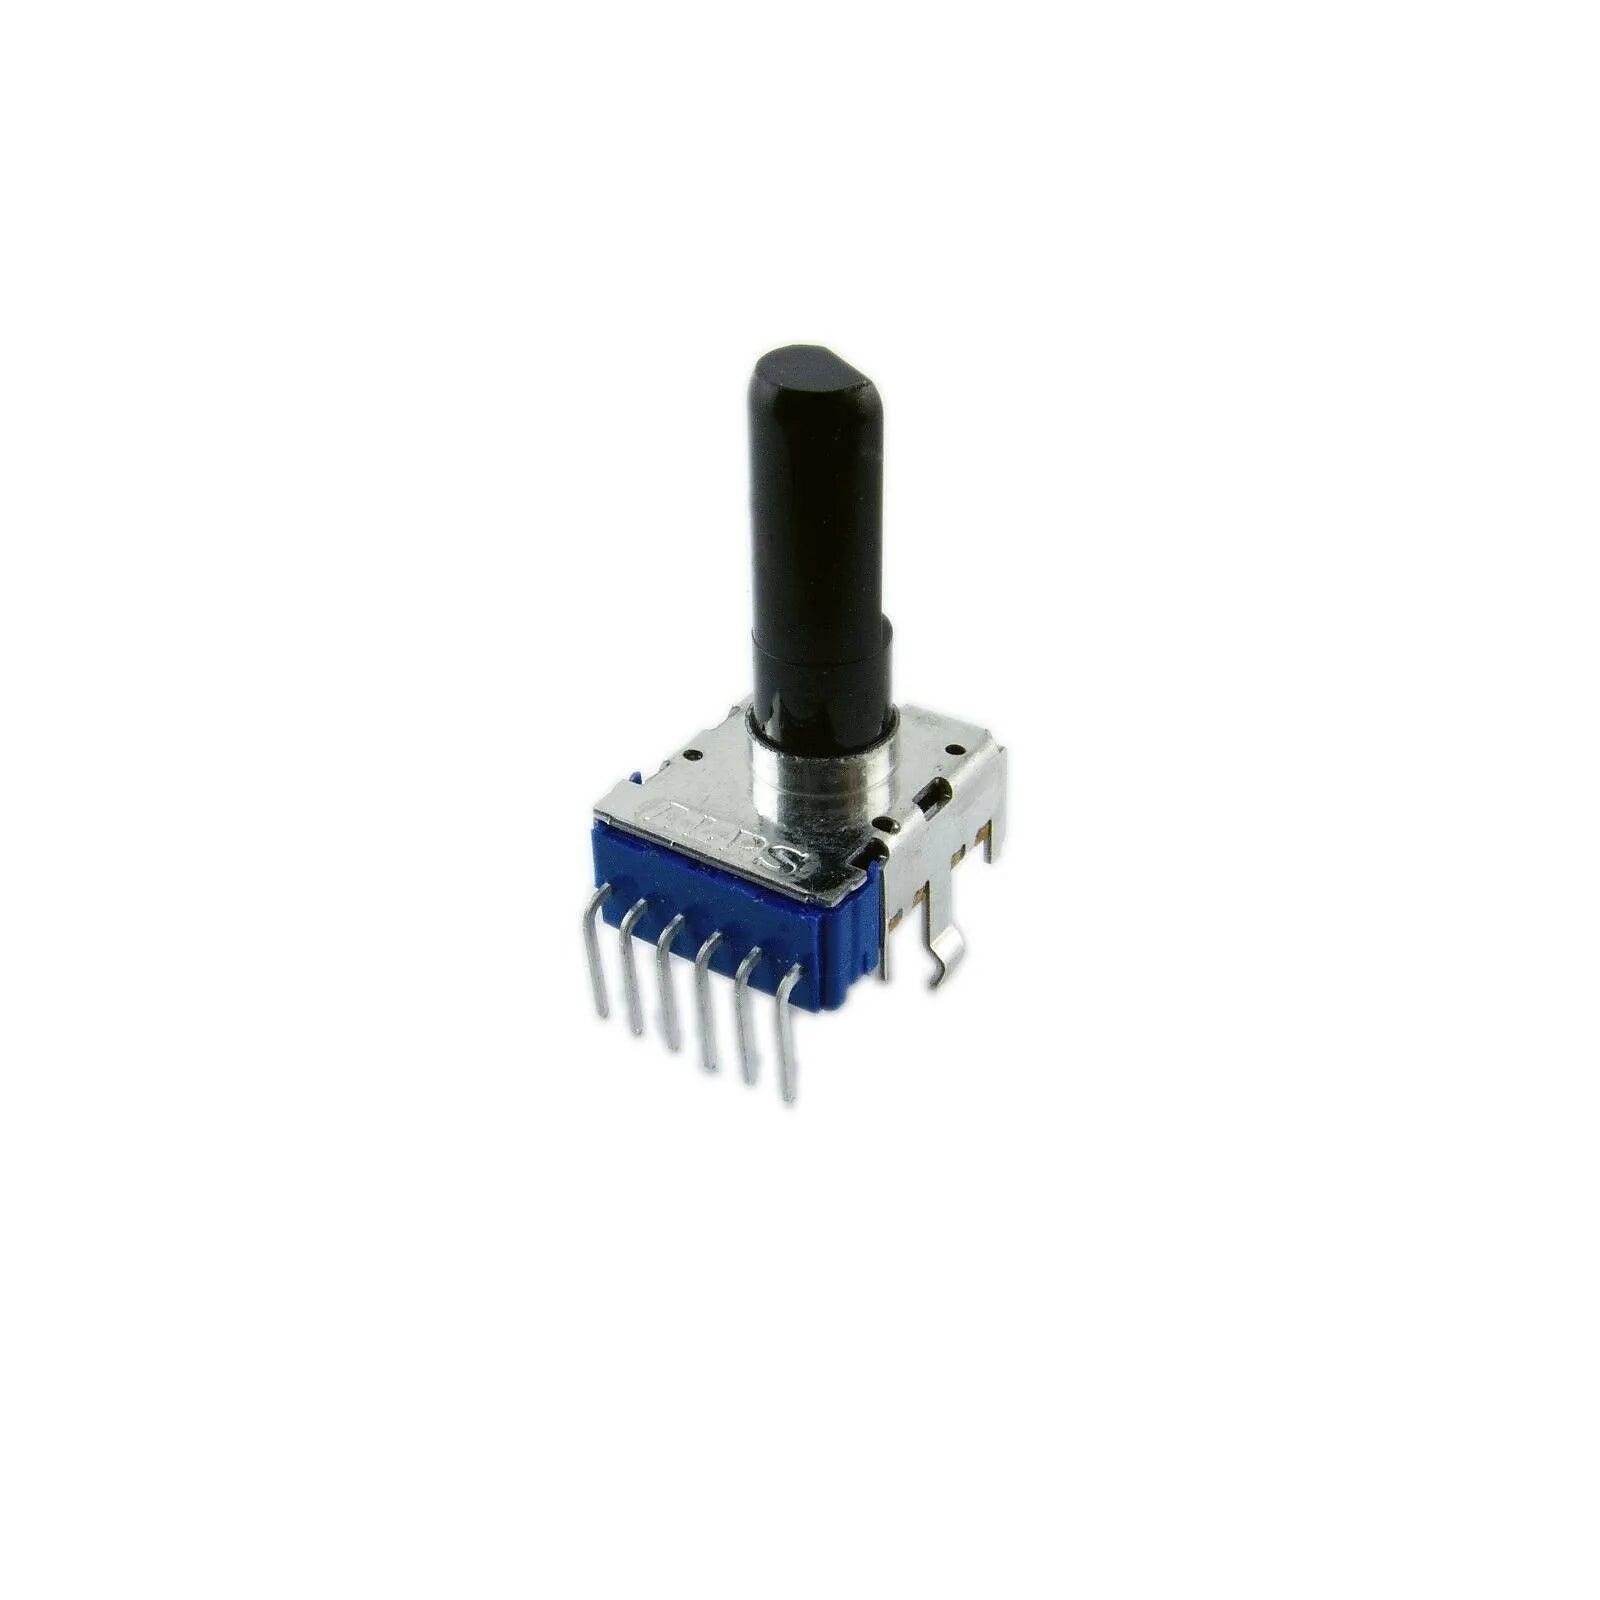 Alesis - Micron - Rotary potentiometer - synthesizer-parts.com